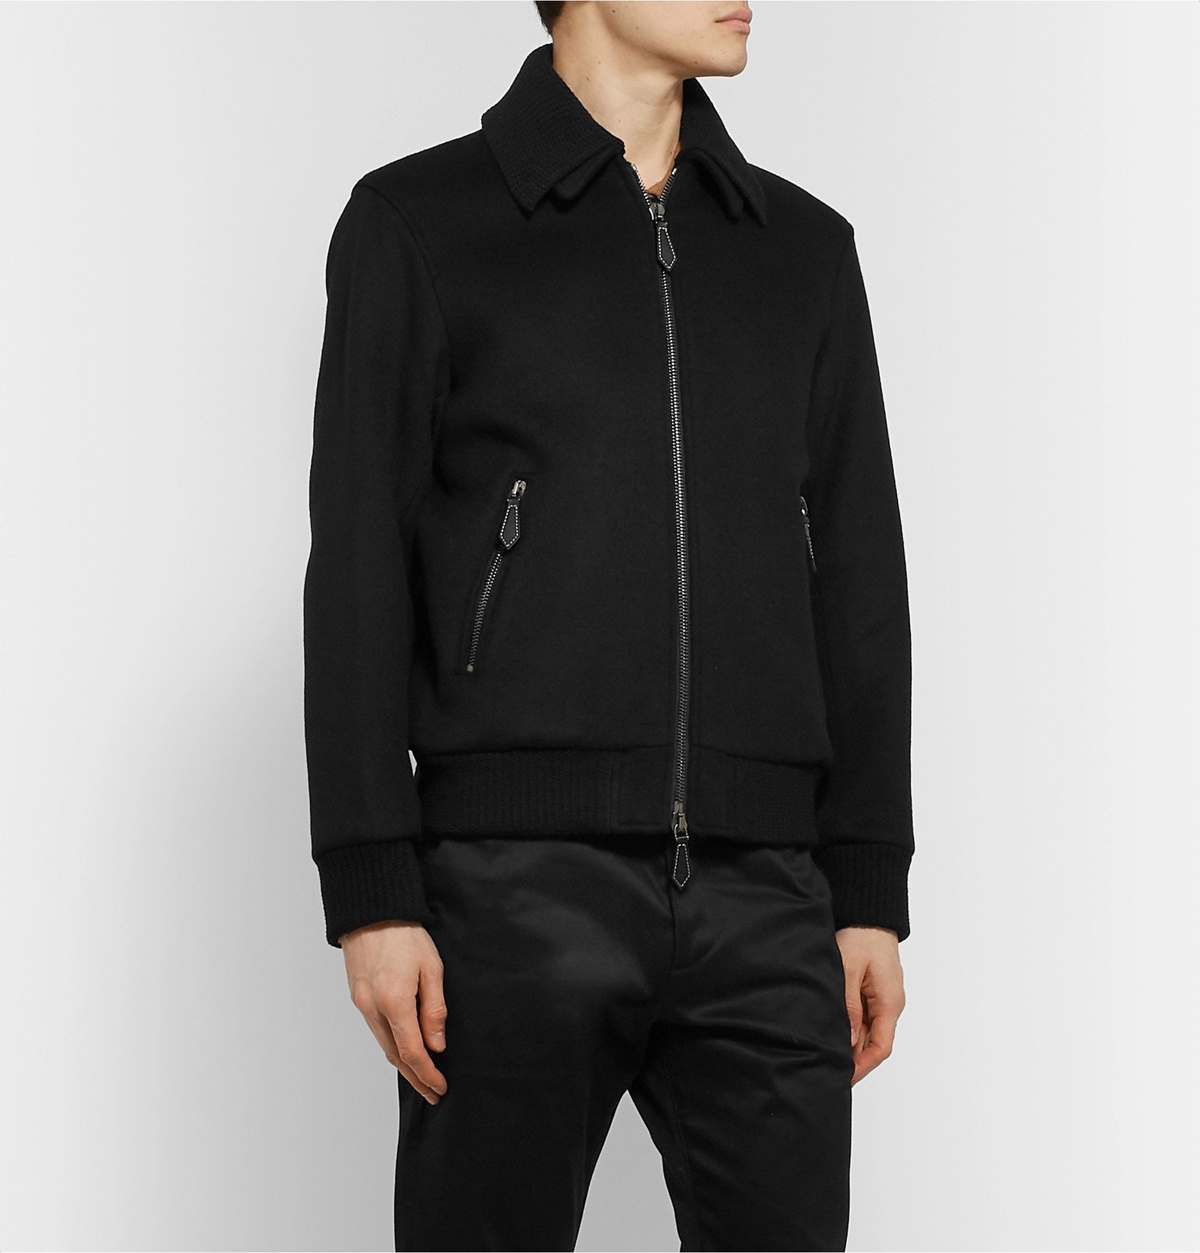 Burberry - Virgin Wool and Cashmere-Blend Bomber Jacket - Black Burberry